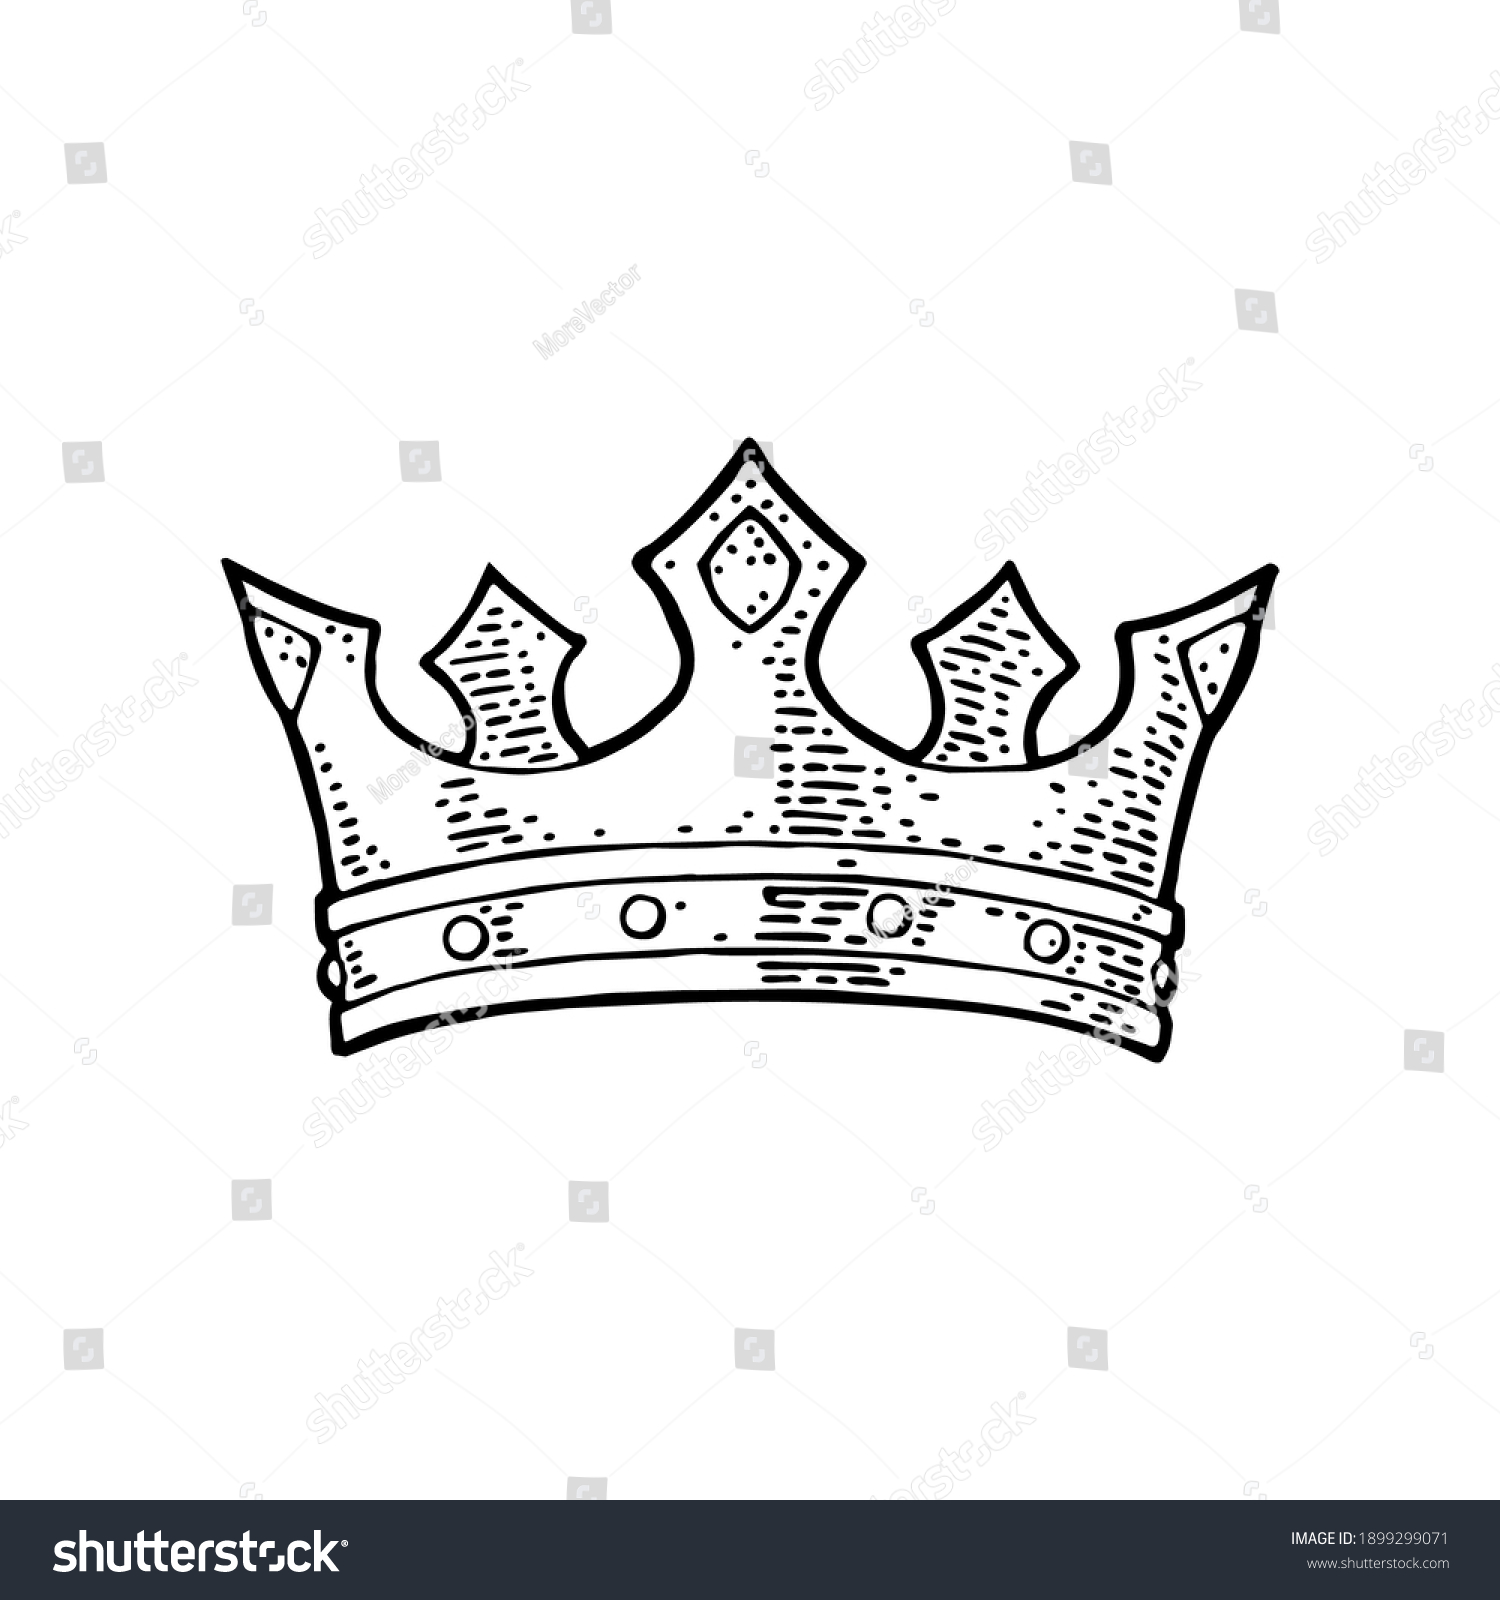 2,075 King etching Images, Stock Photos & Vectors | Shutterstock